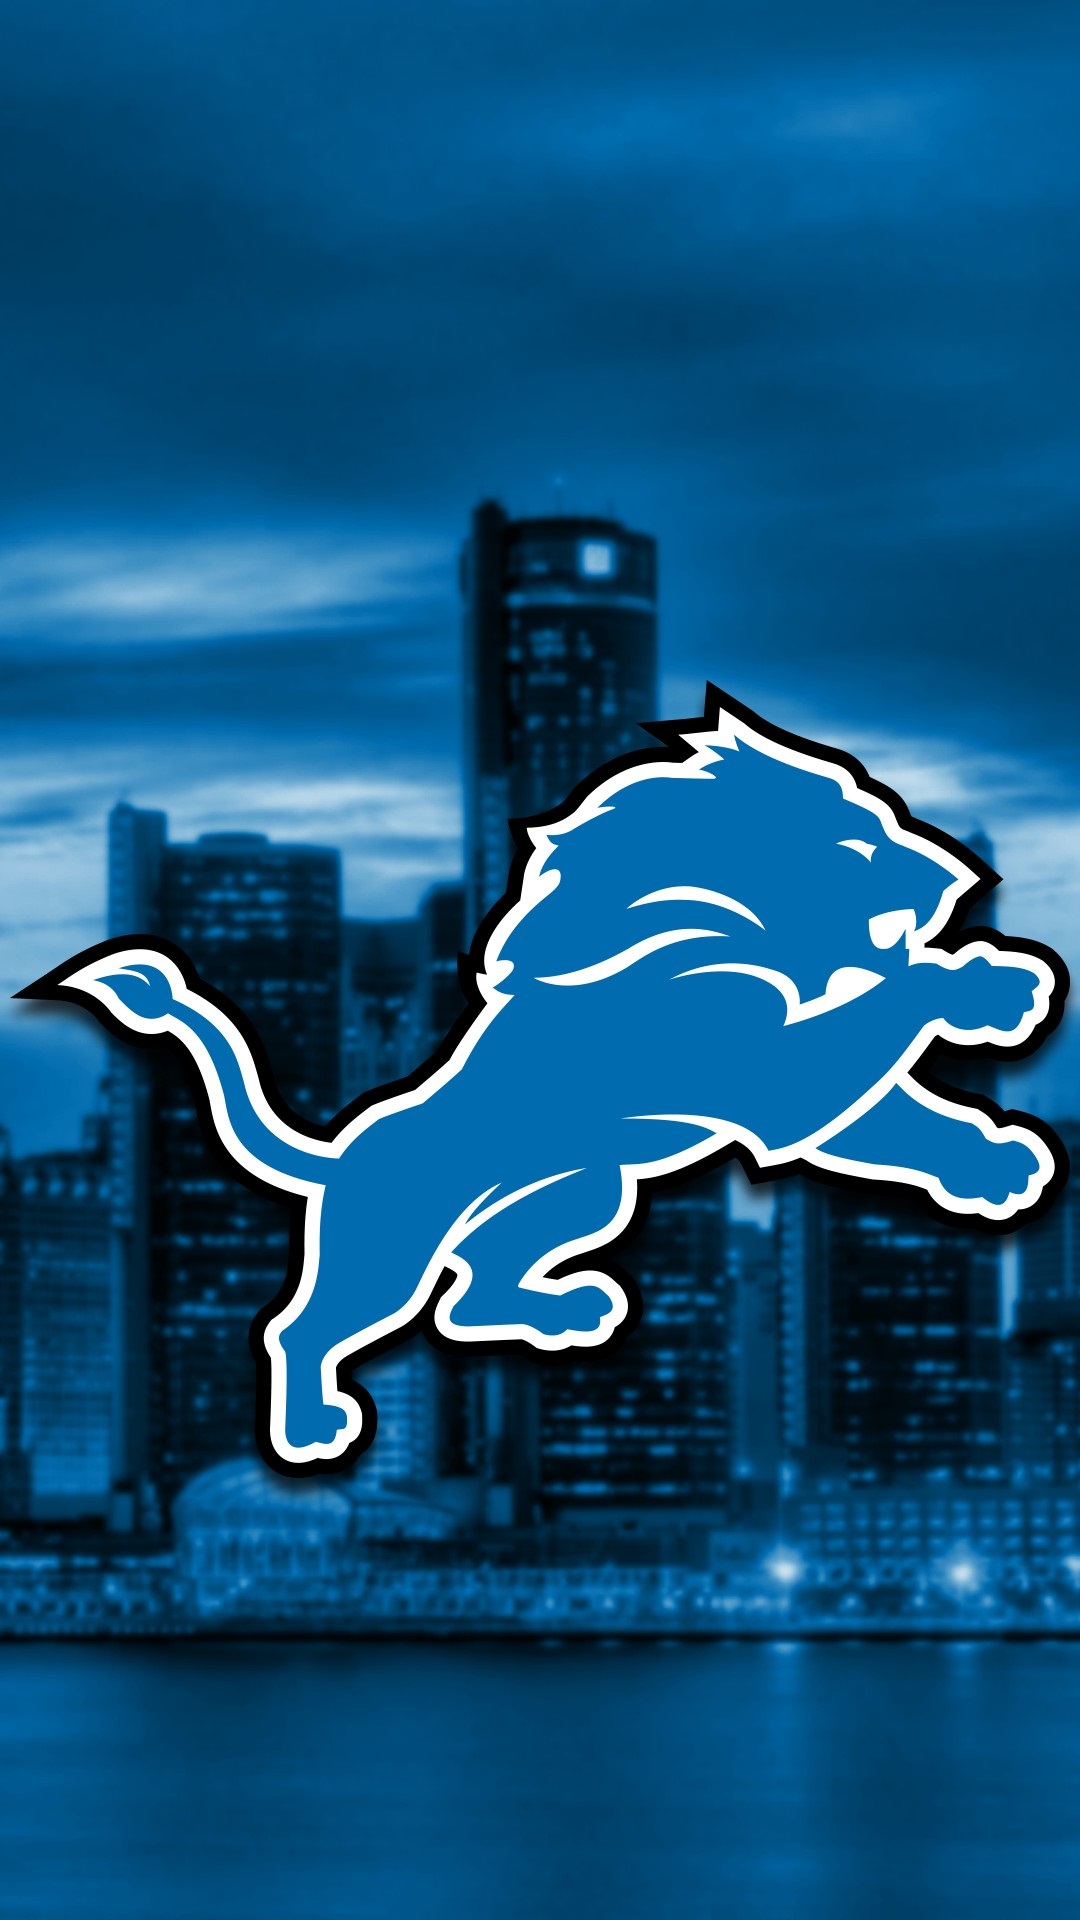 Detroit Lions iPhone Wallpaper HD with high-resolution 1080x1920 pixel. Download and set as wallpaper for Apple iPhone X, XS Max, XR, 8, 7, 6, SE, iPad, Android